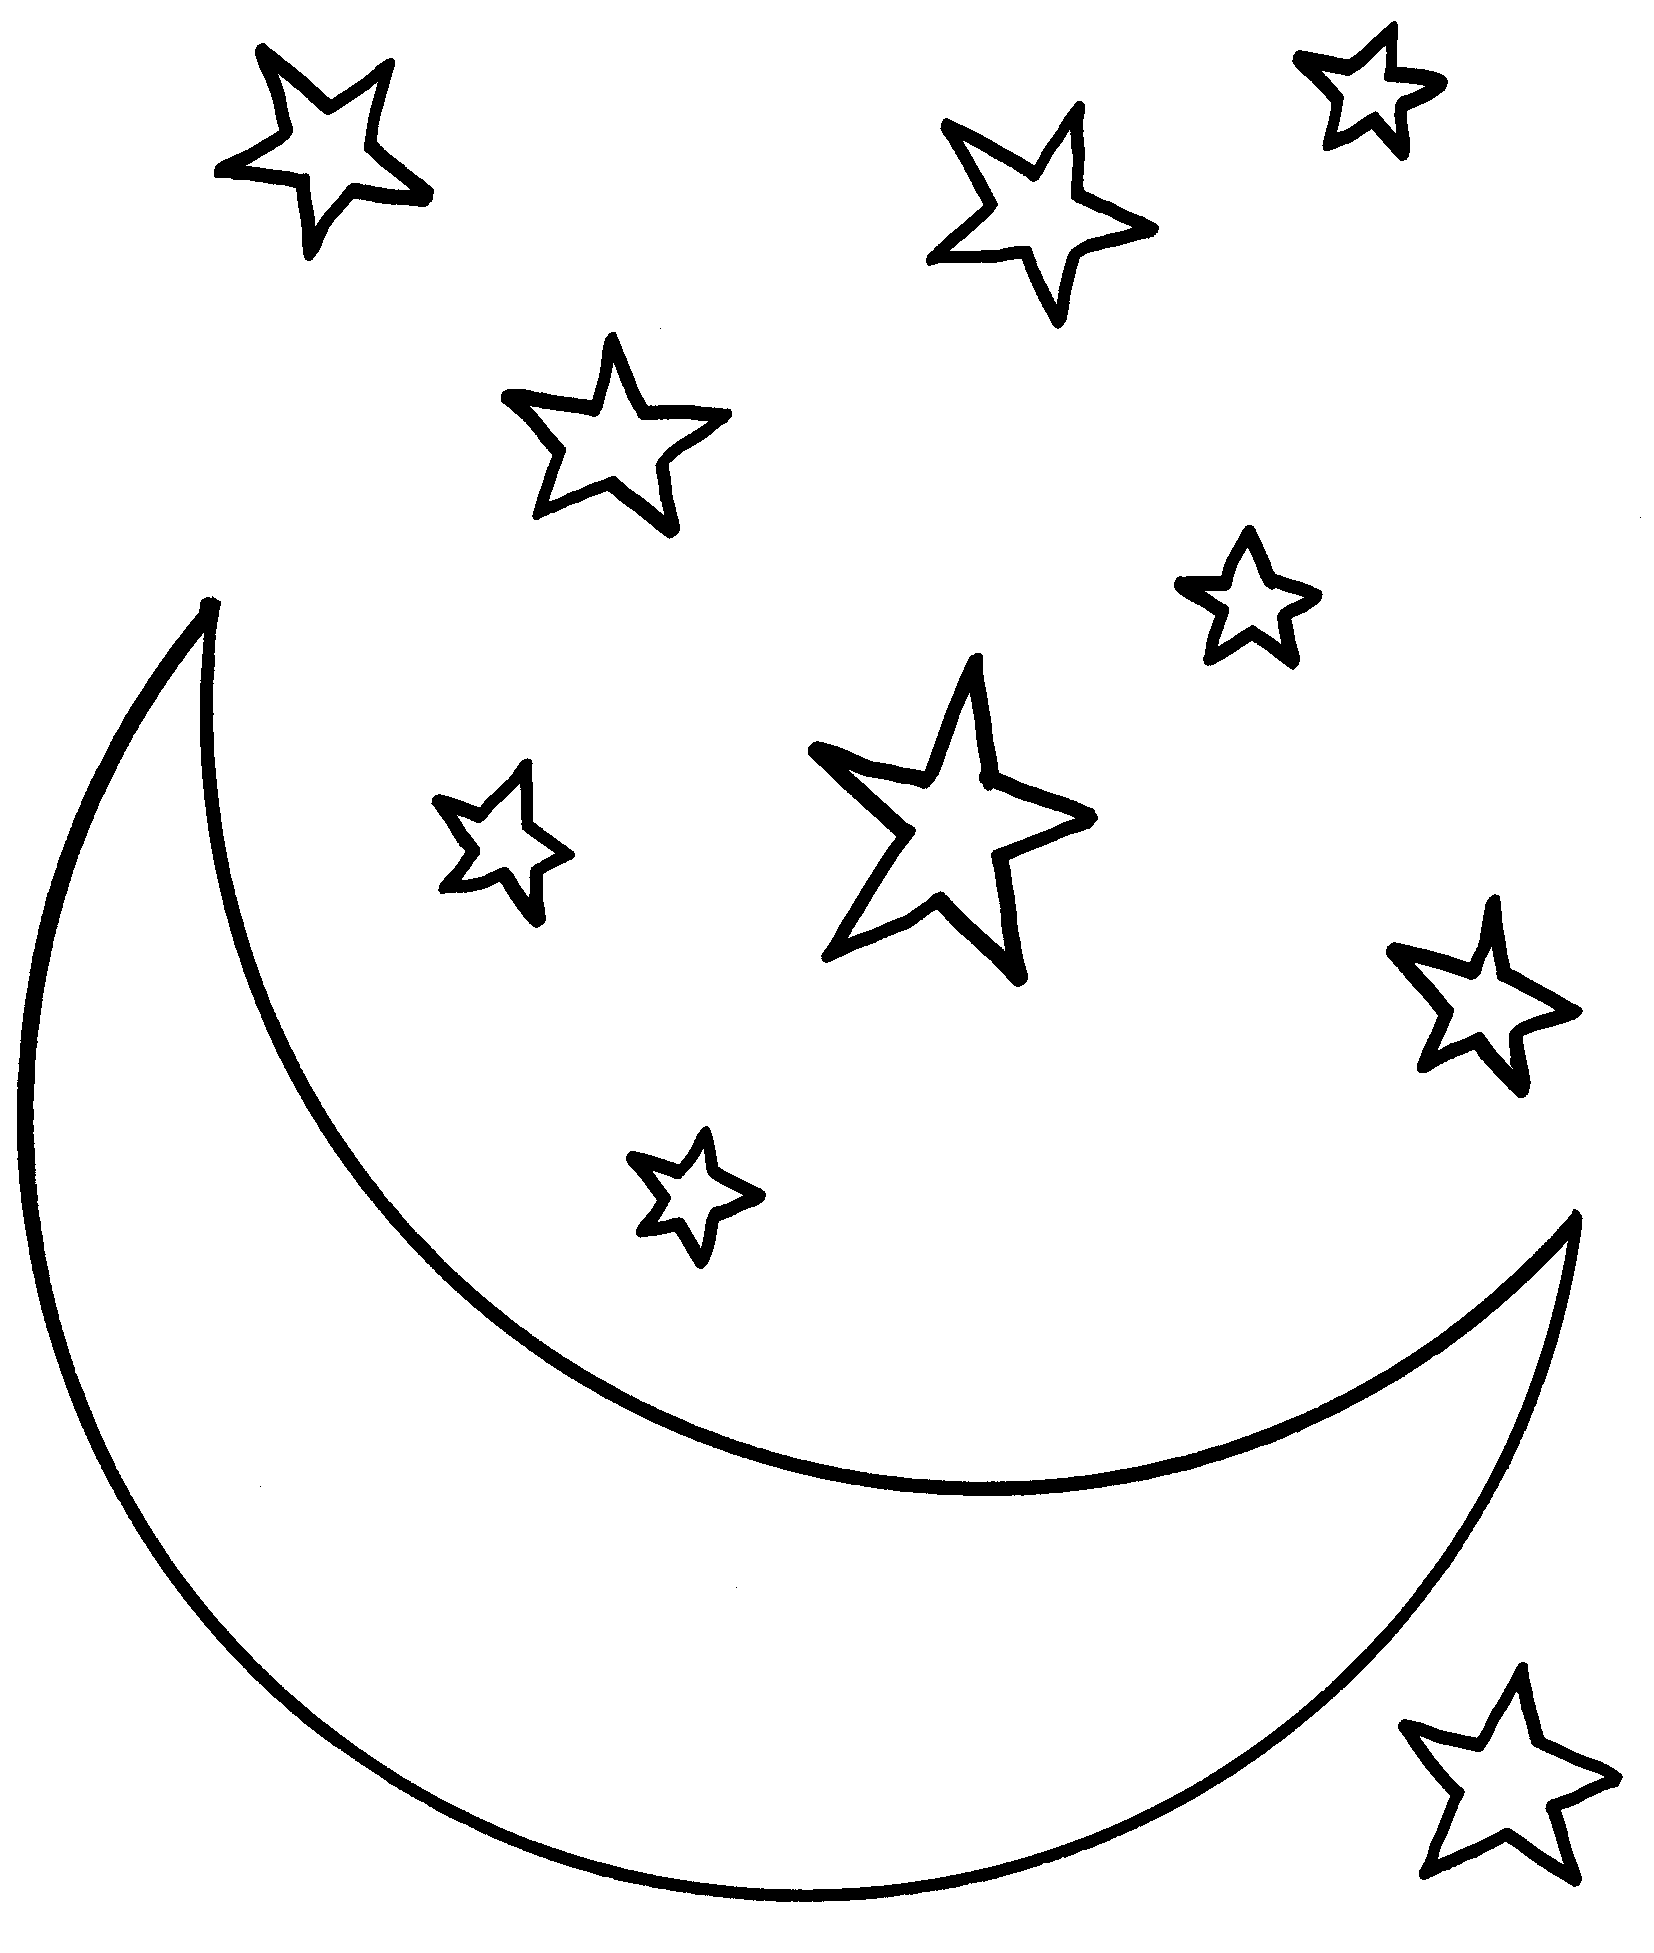 Coloring Page - Moon & Stars